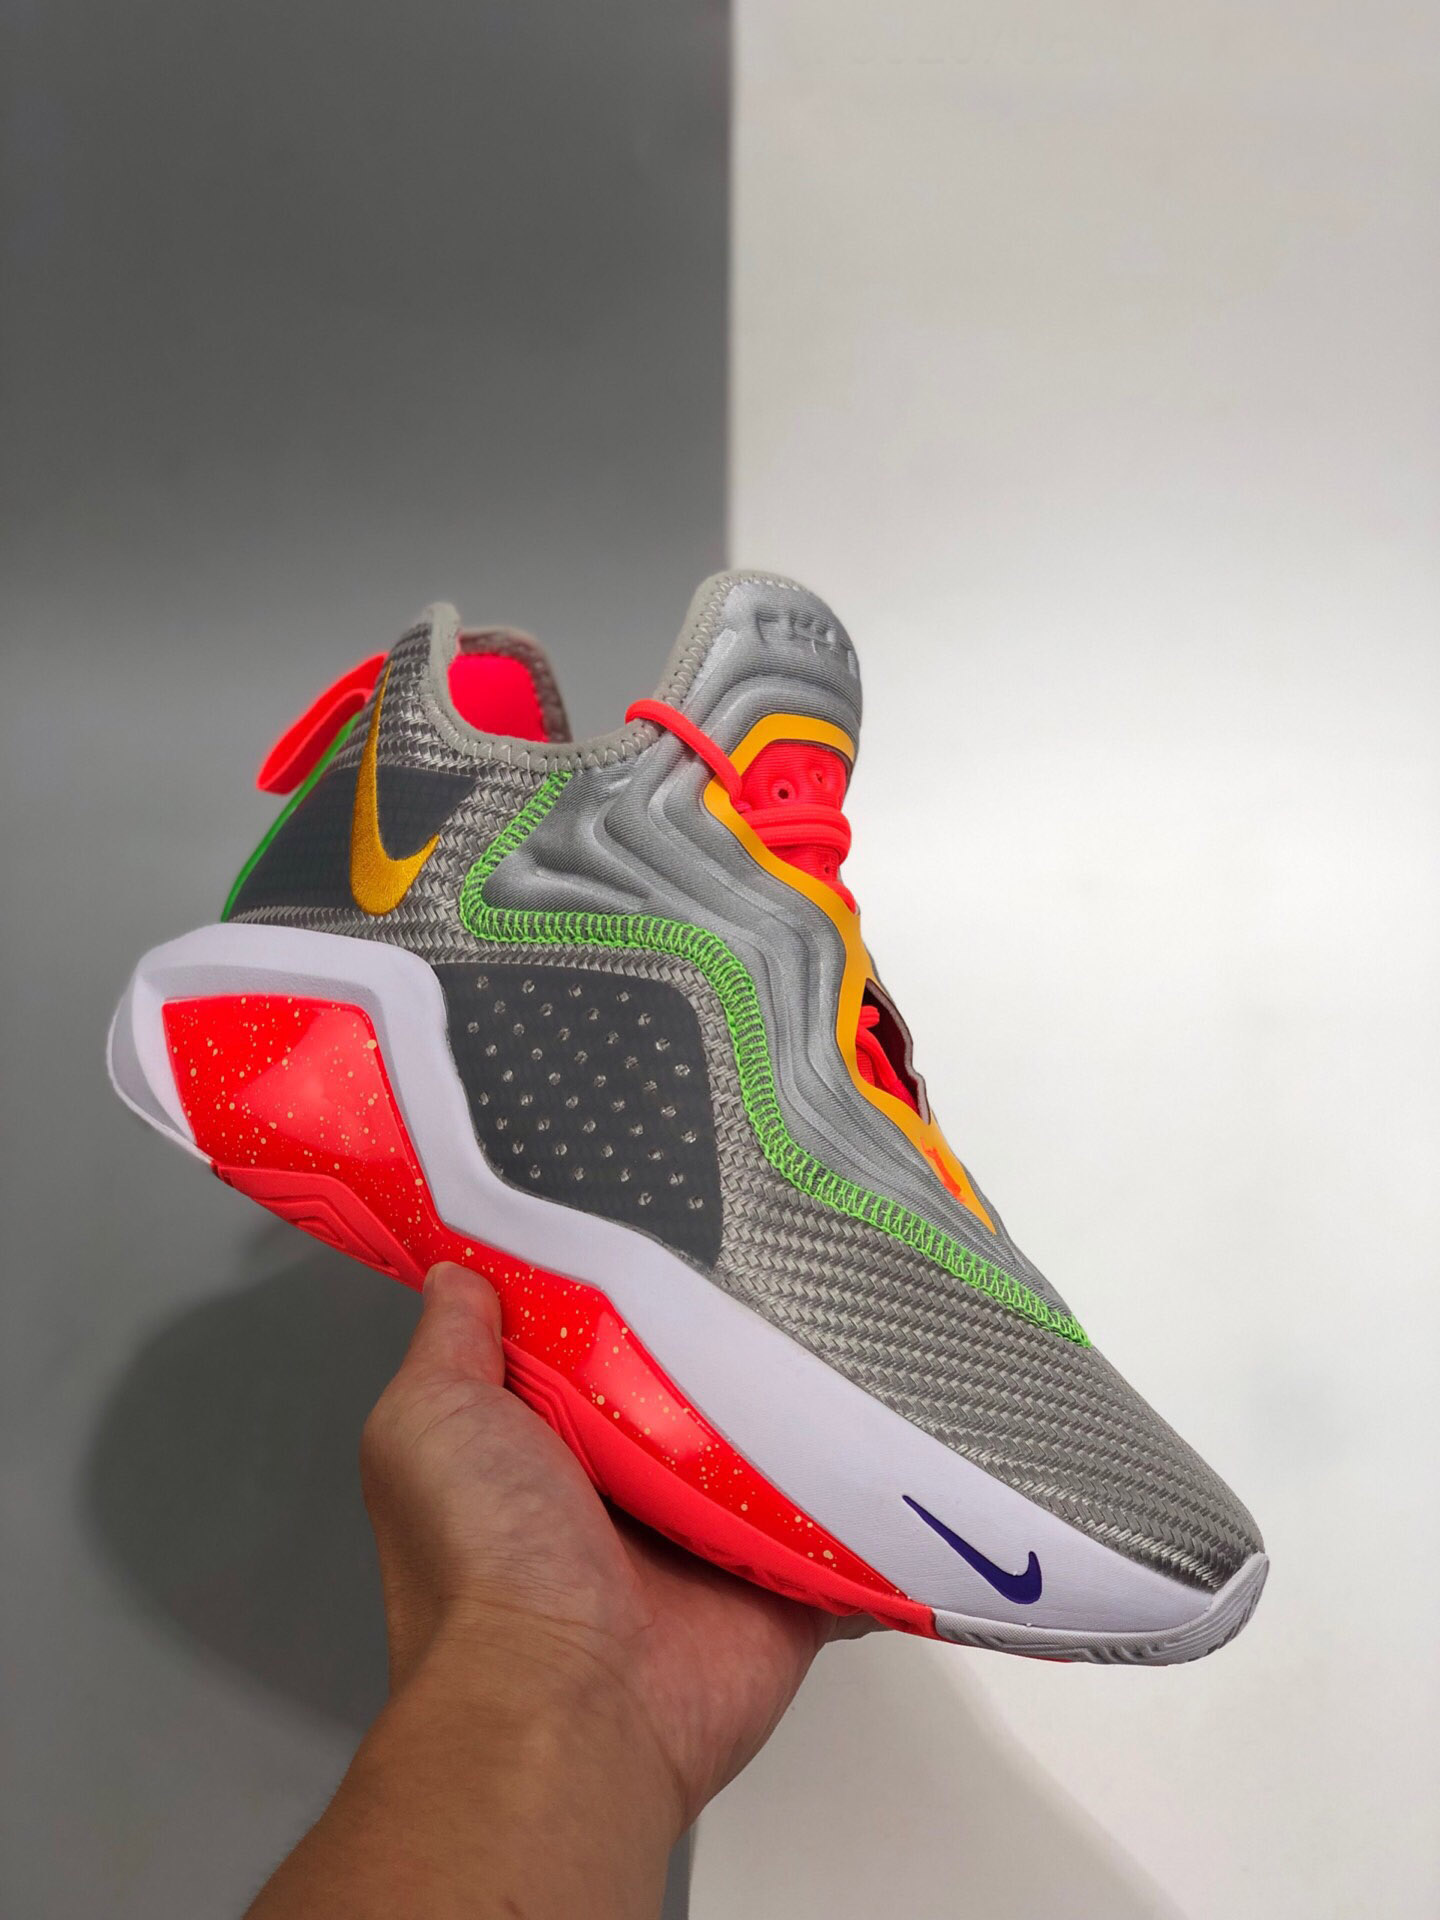 Nike LeBron Soldier 14 "Hare" CK6047-001 Shoes